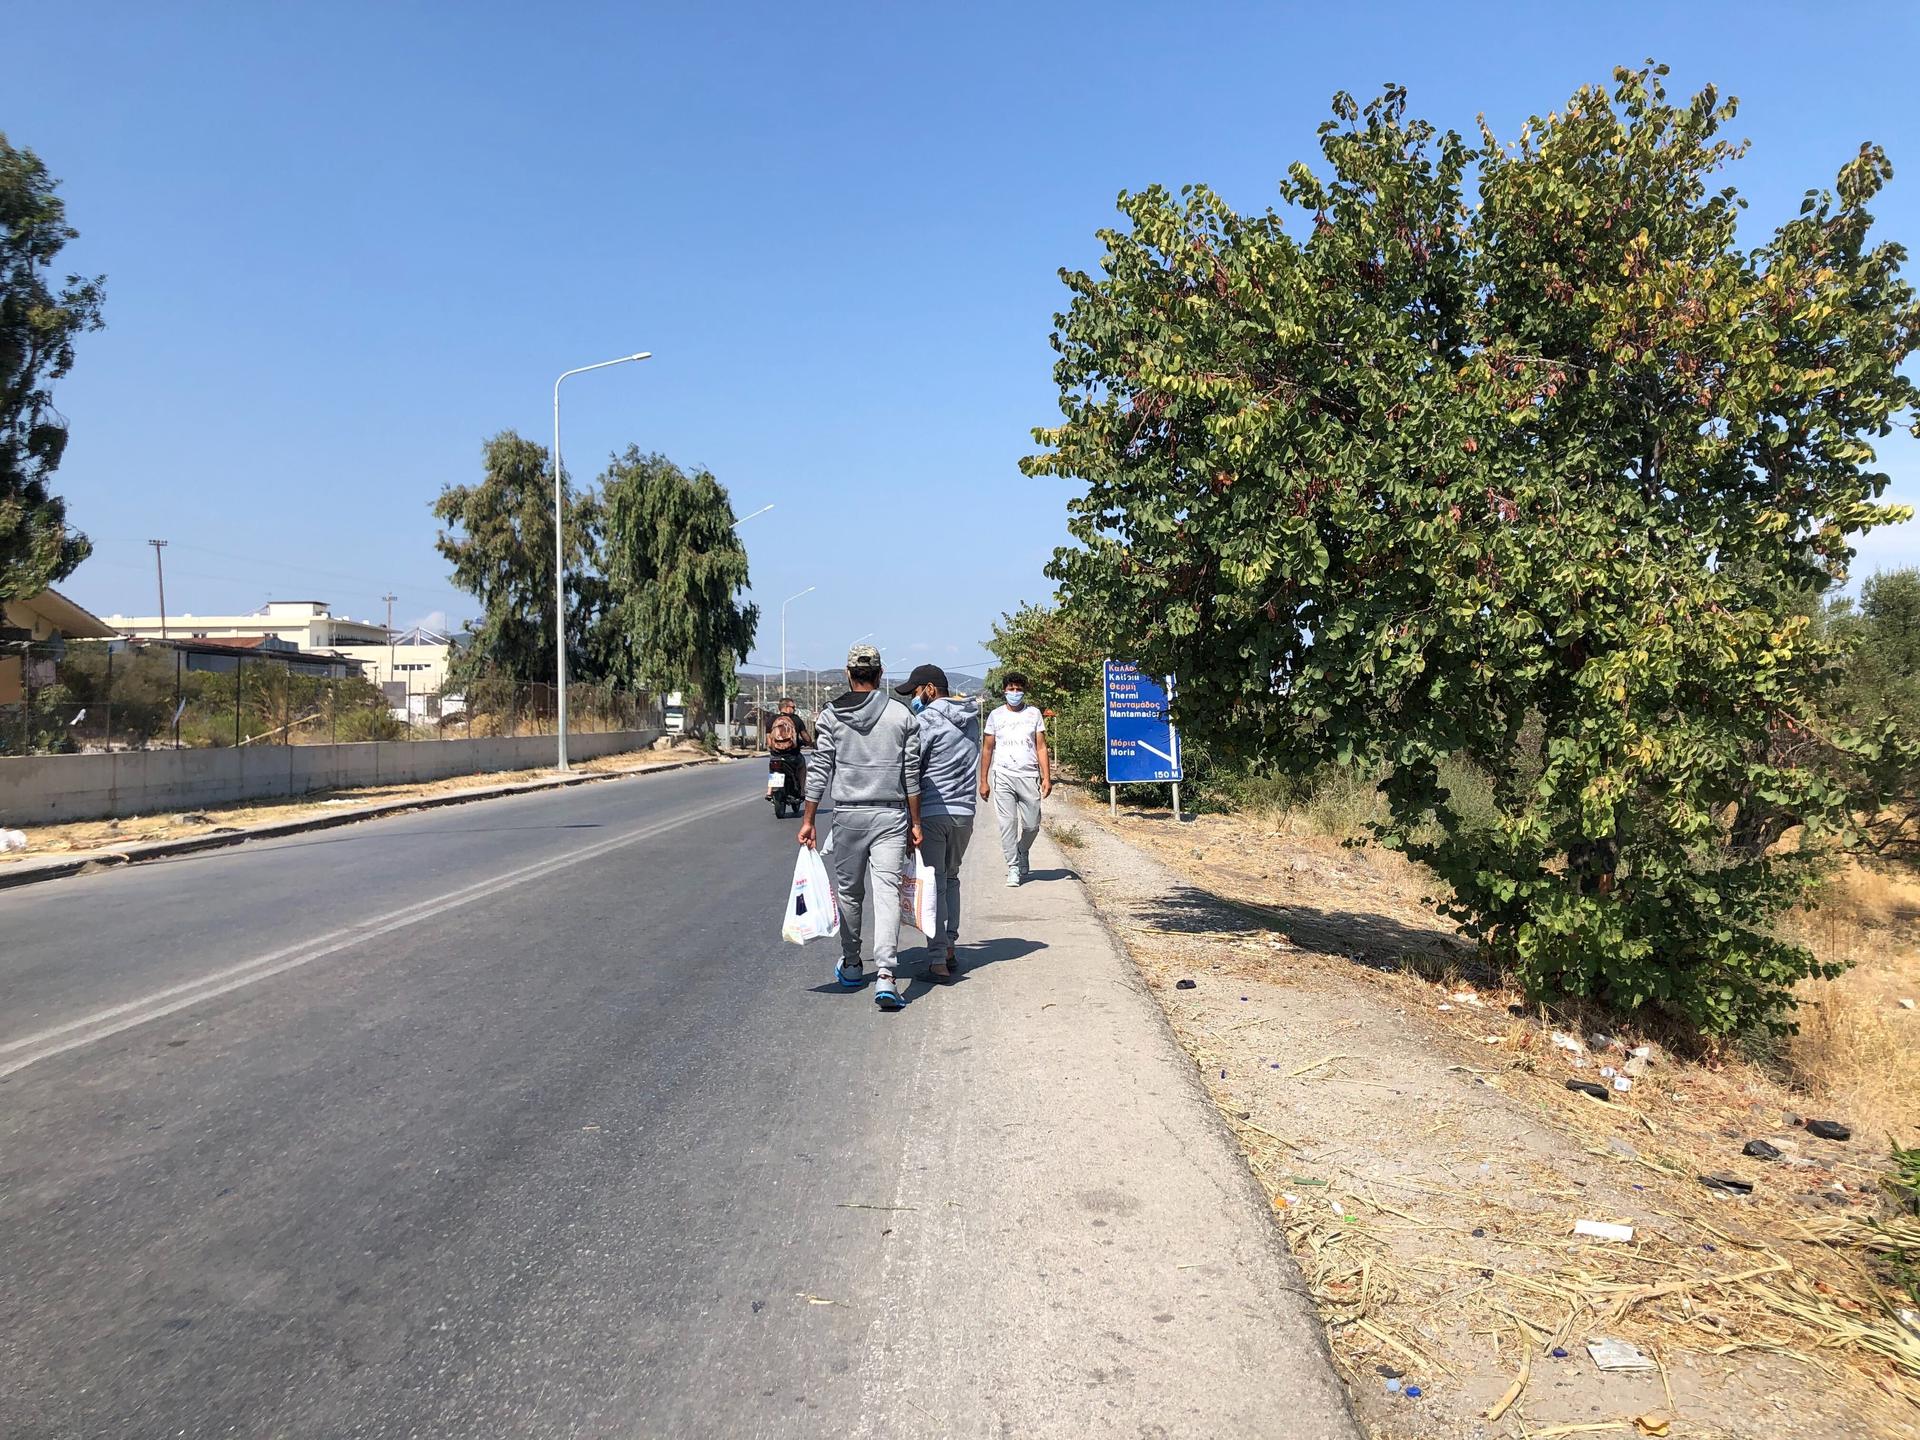 Two Syrian asylum-seekers return from a shopping trip to the port city of Mytilene, where they picked up rice, tomato sauce and other food. They say the food being distributed at the camp is not enough.